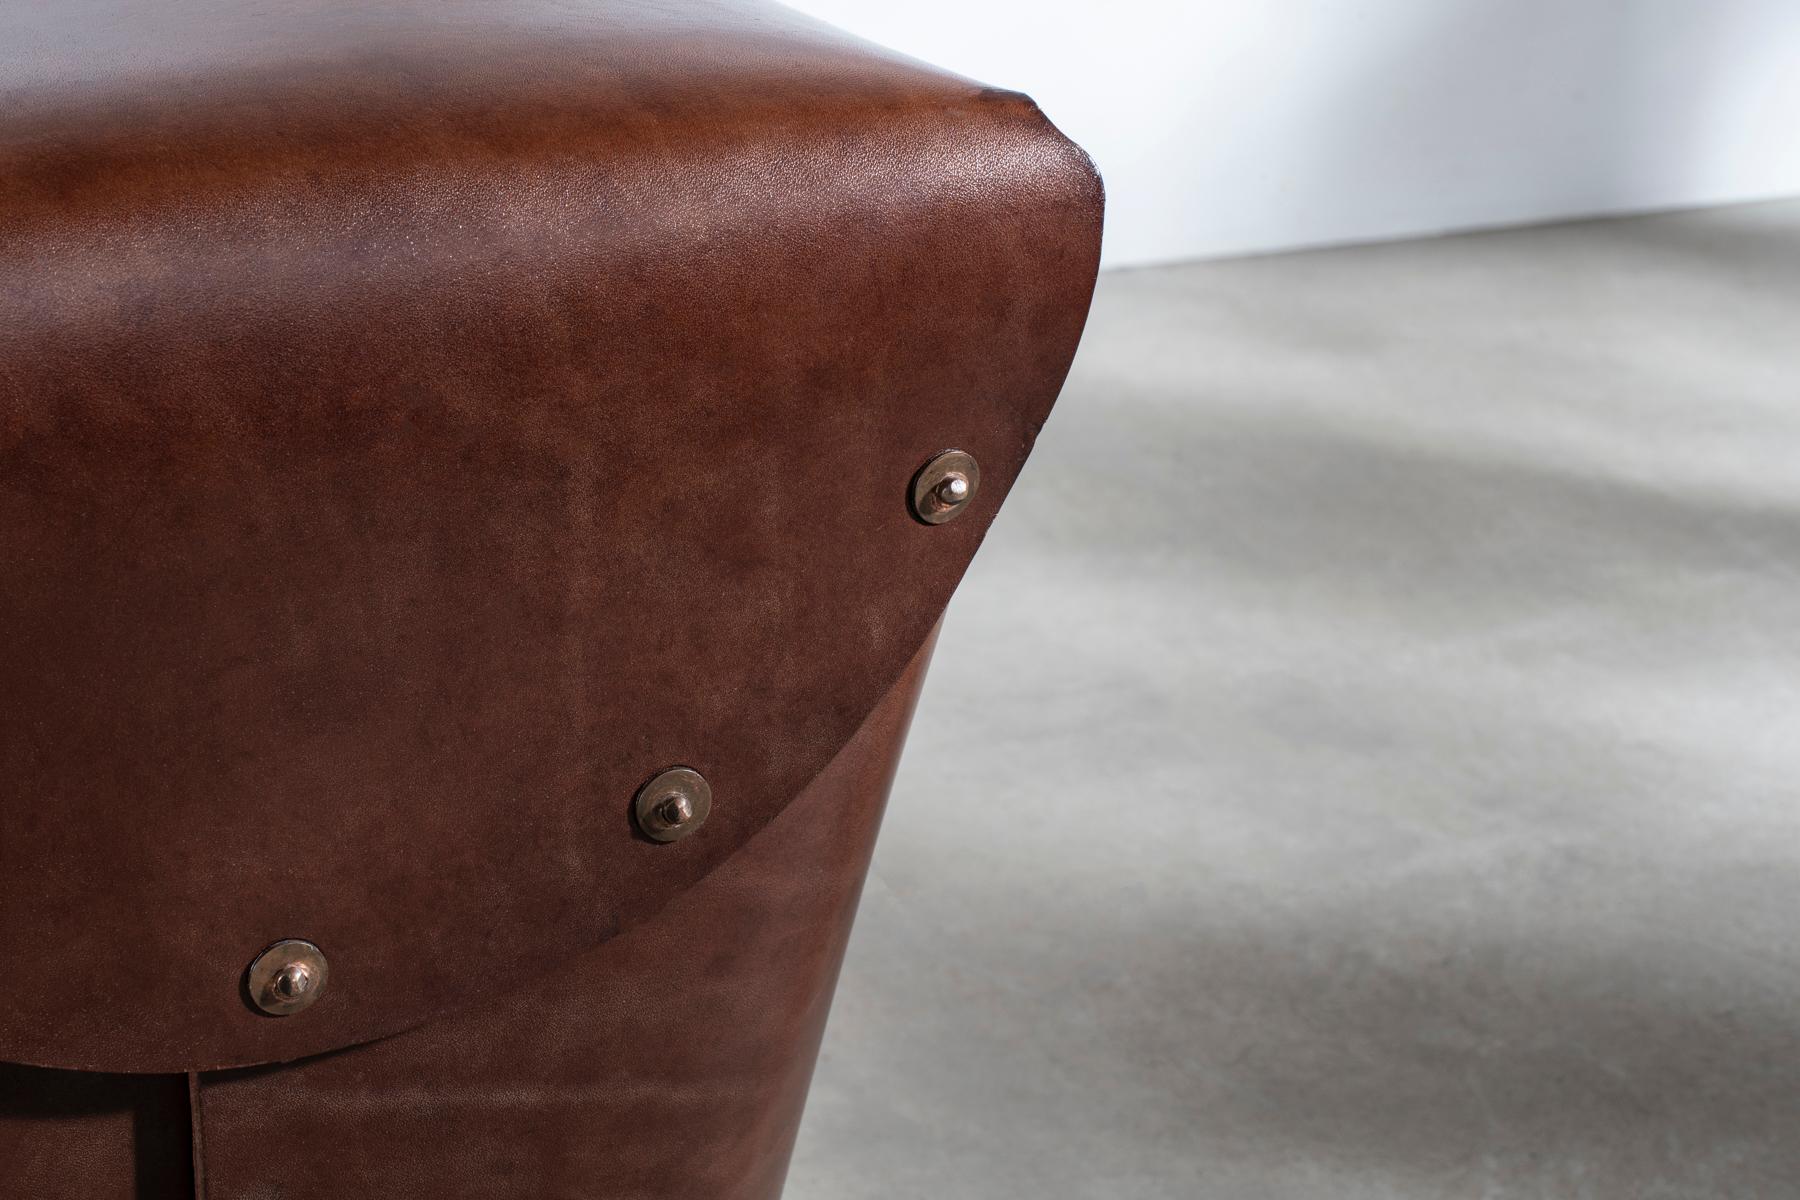 Contemporary Rivet Stool II by Bill Amberg, bridle leather stool with hand-set copper rivets For Sale